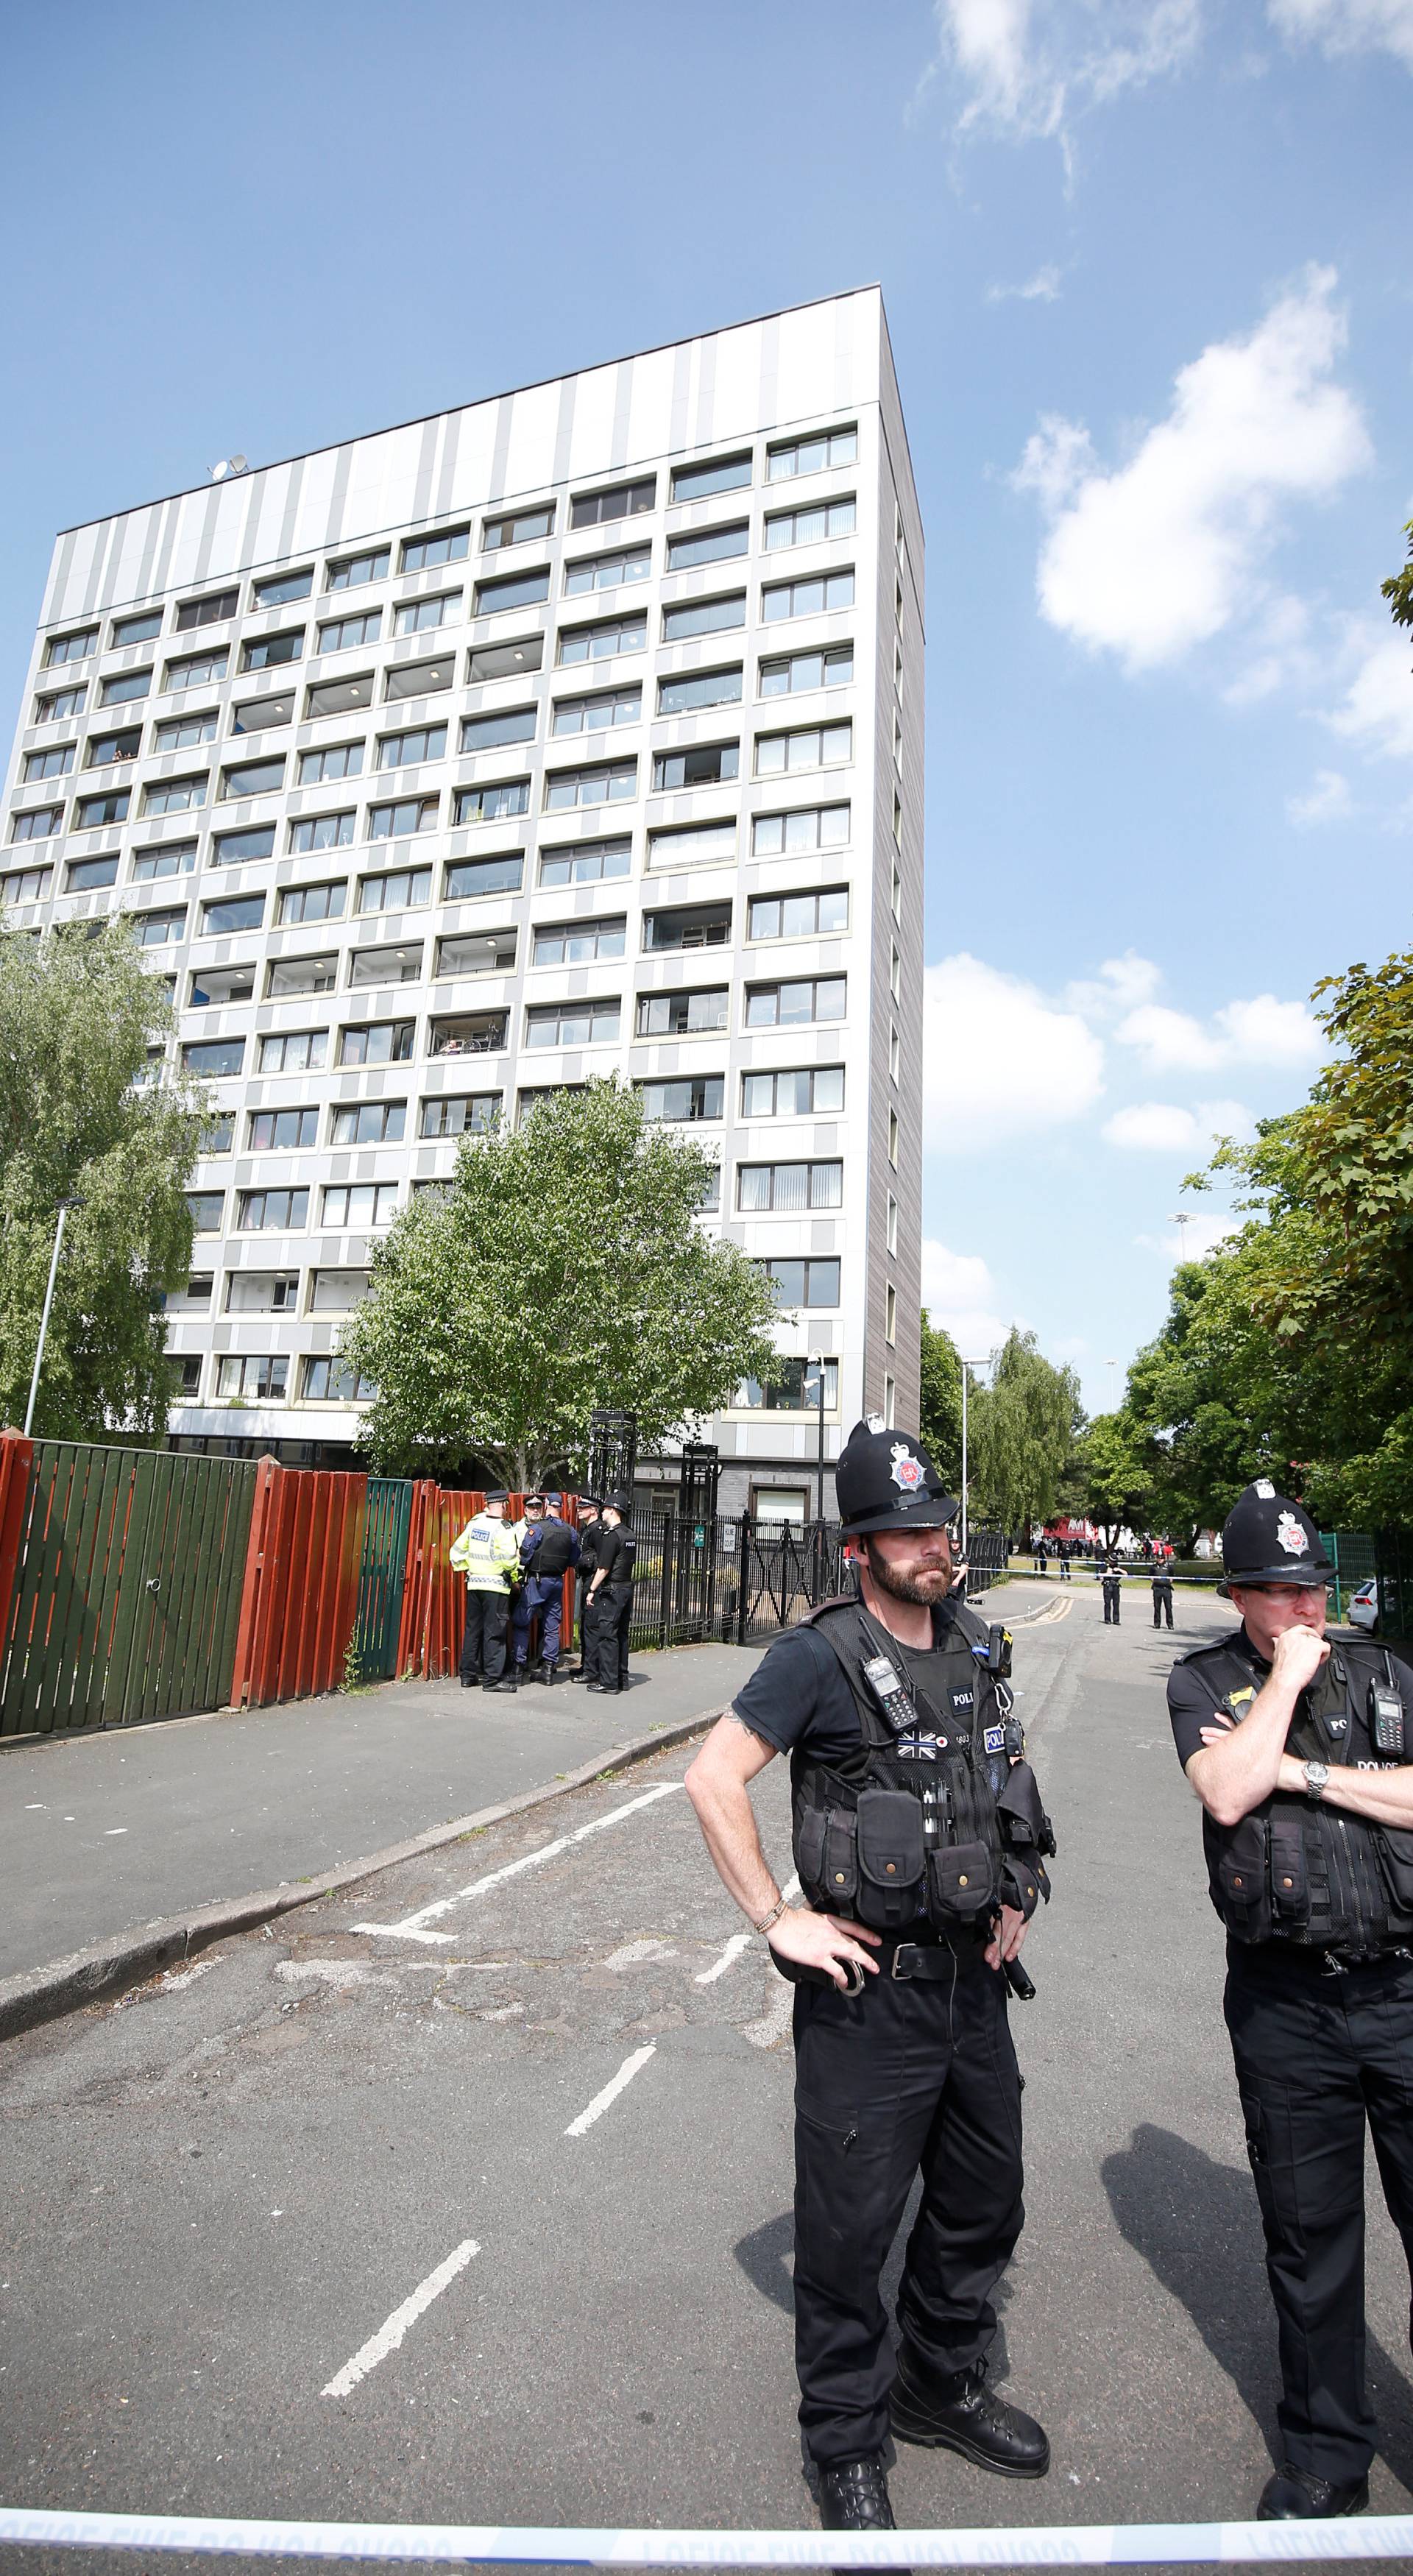 Police officers stand outside flats in Hulme, Manchester